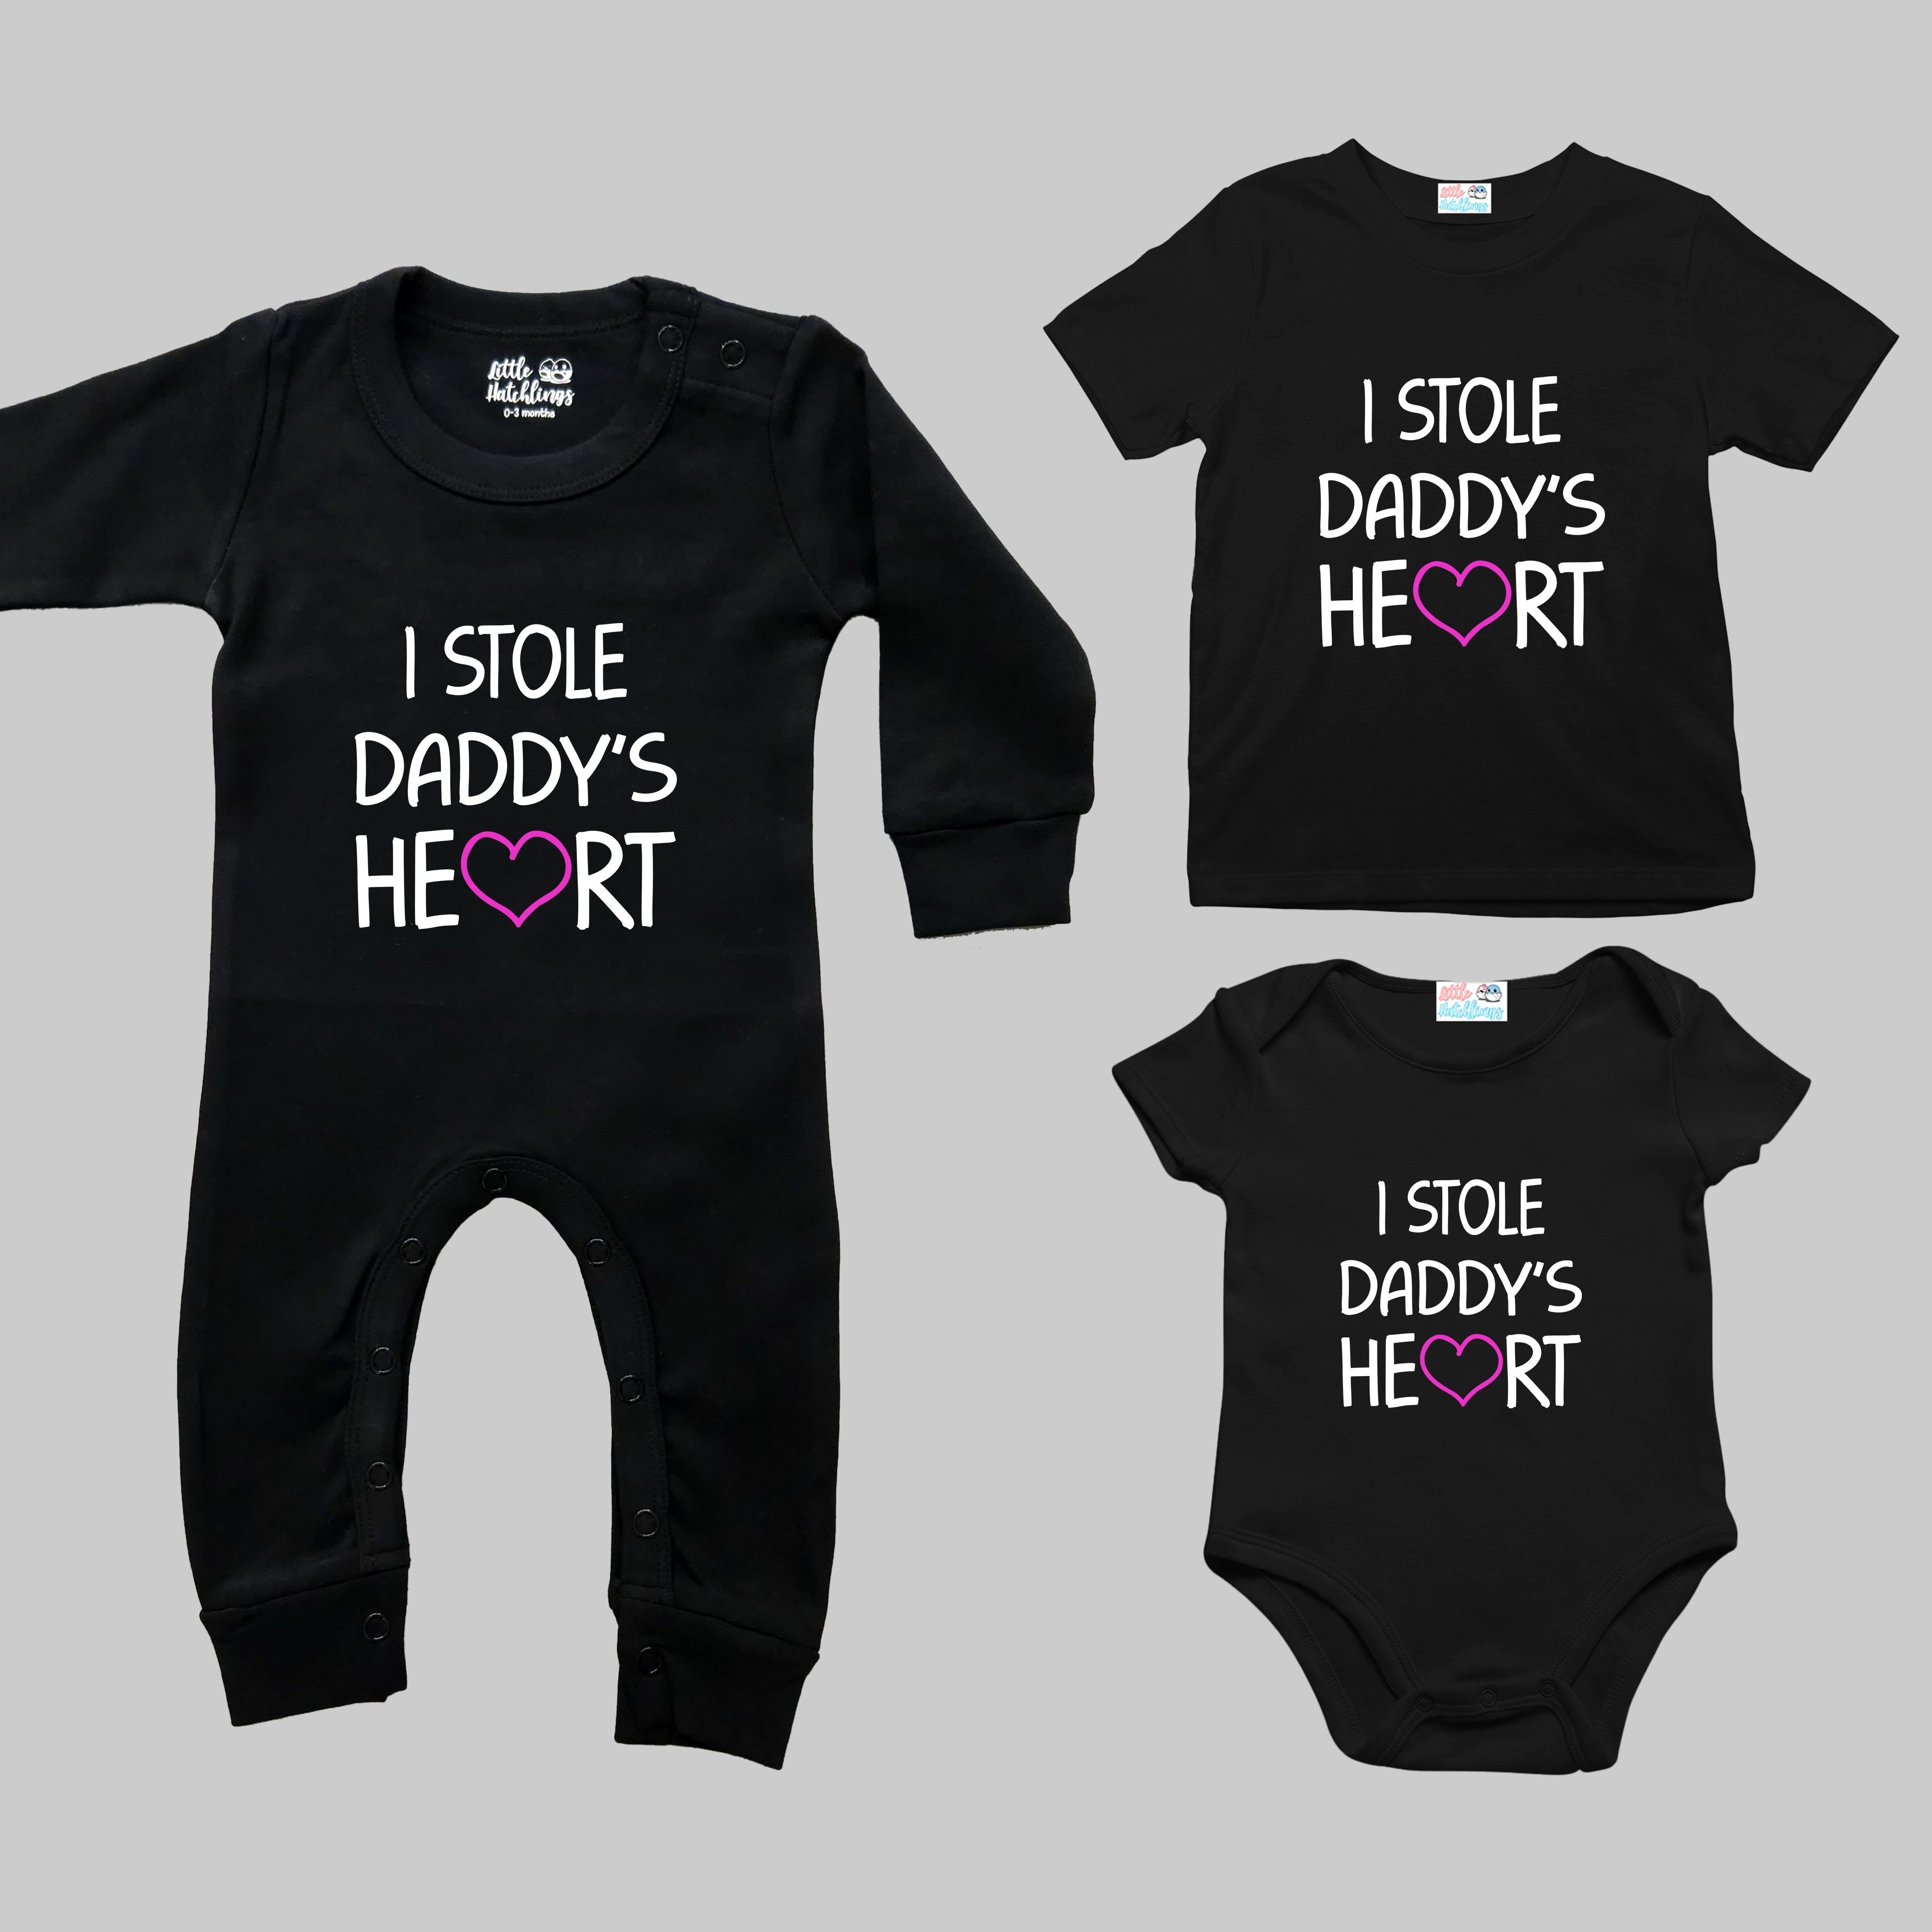 I Stole Daddy's Heart Black Combo - Onesie + Adult T-shirt